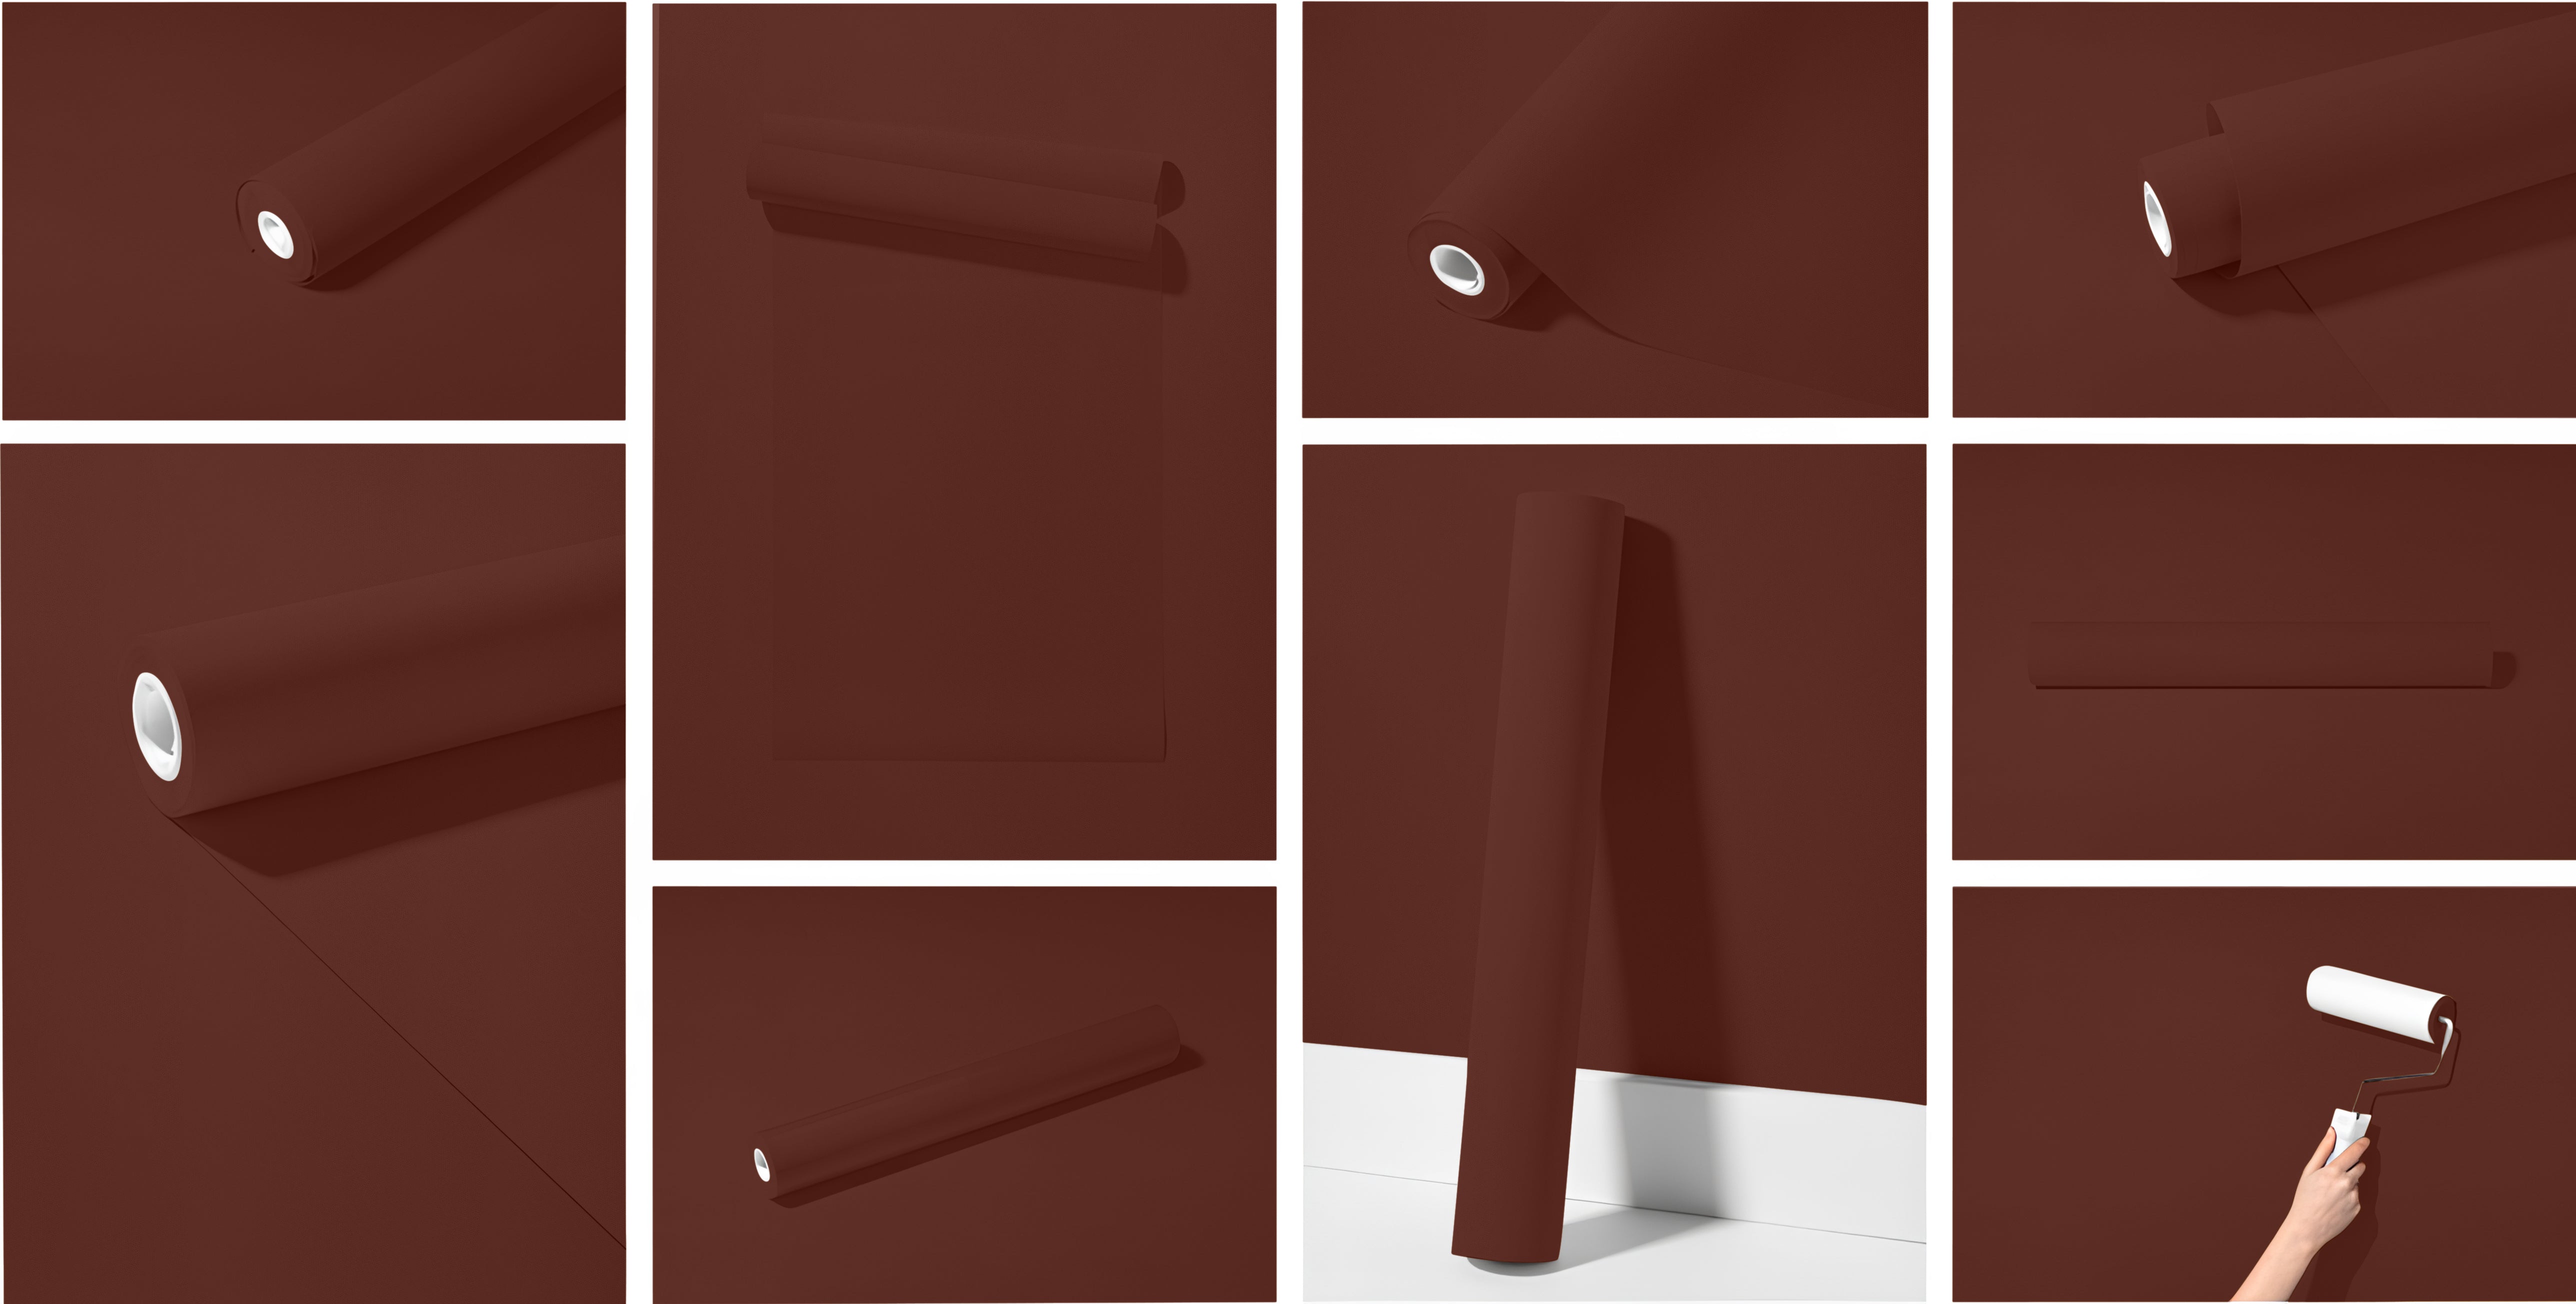 Peel & Stick Removable Re-usable Paint - Color RAL 8015 Chestnut Brown - offRAL™ - RALRAW LLC, USA